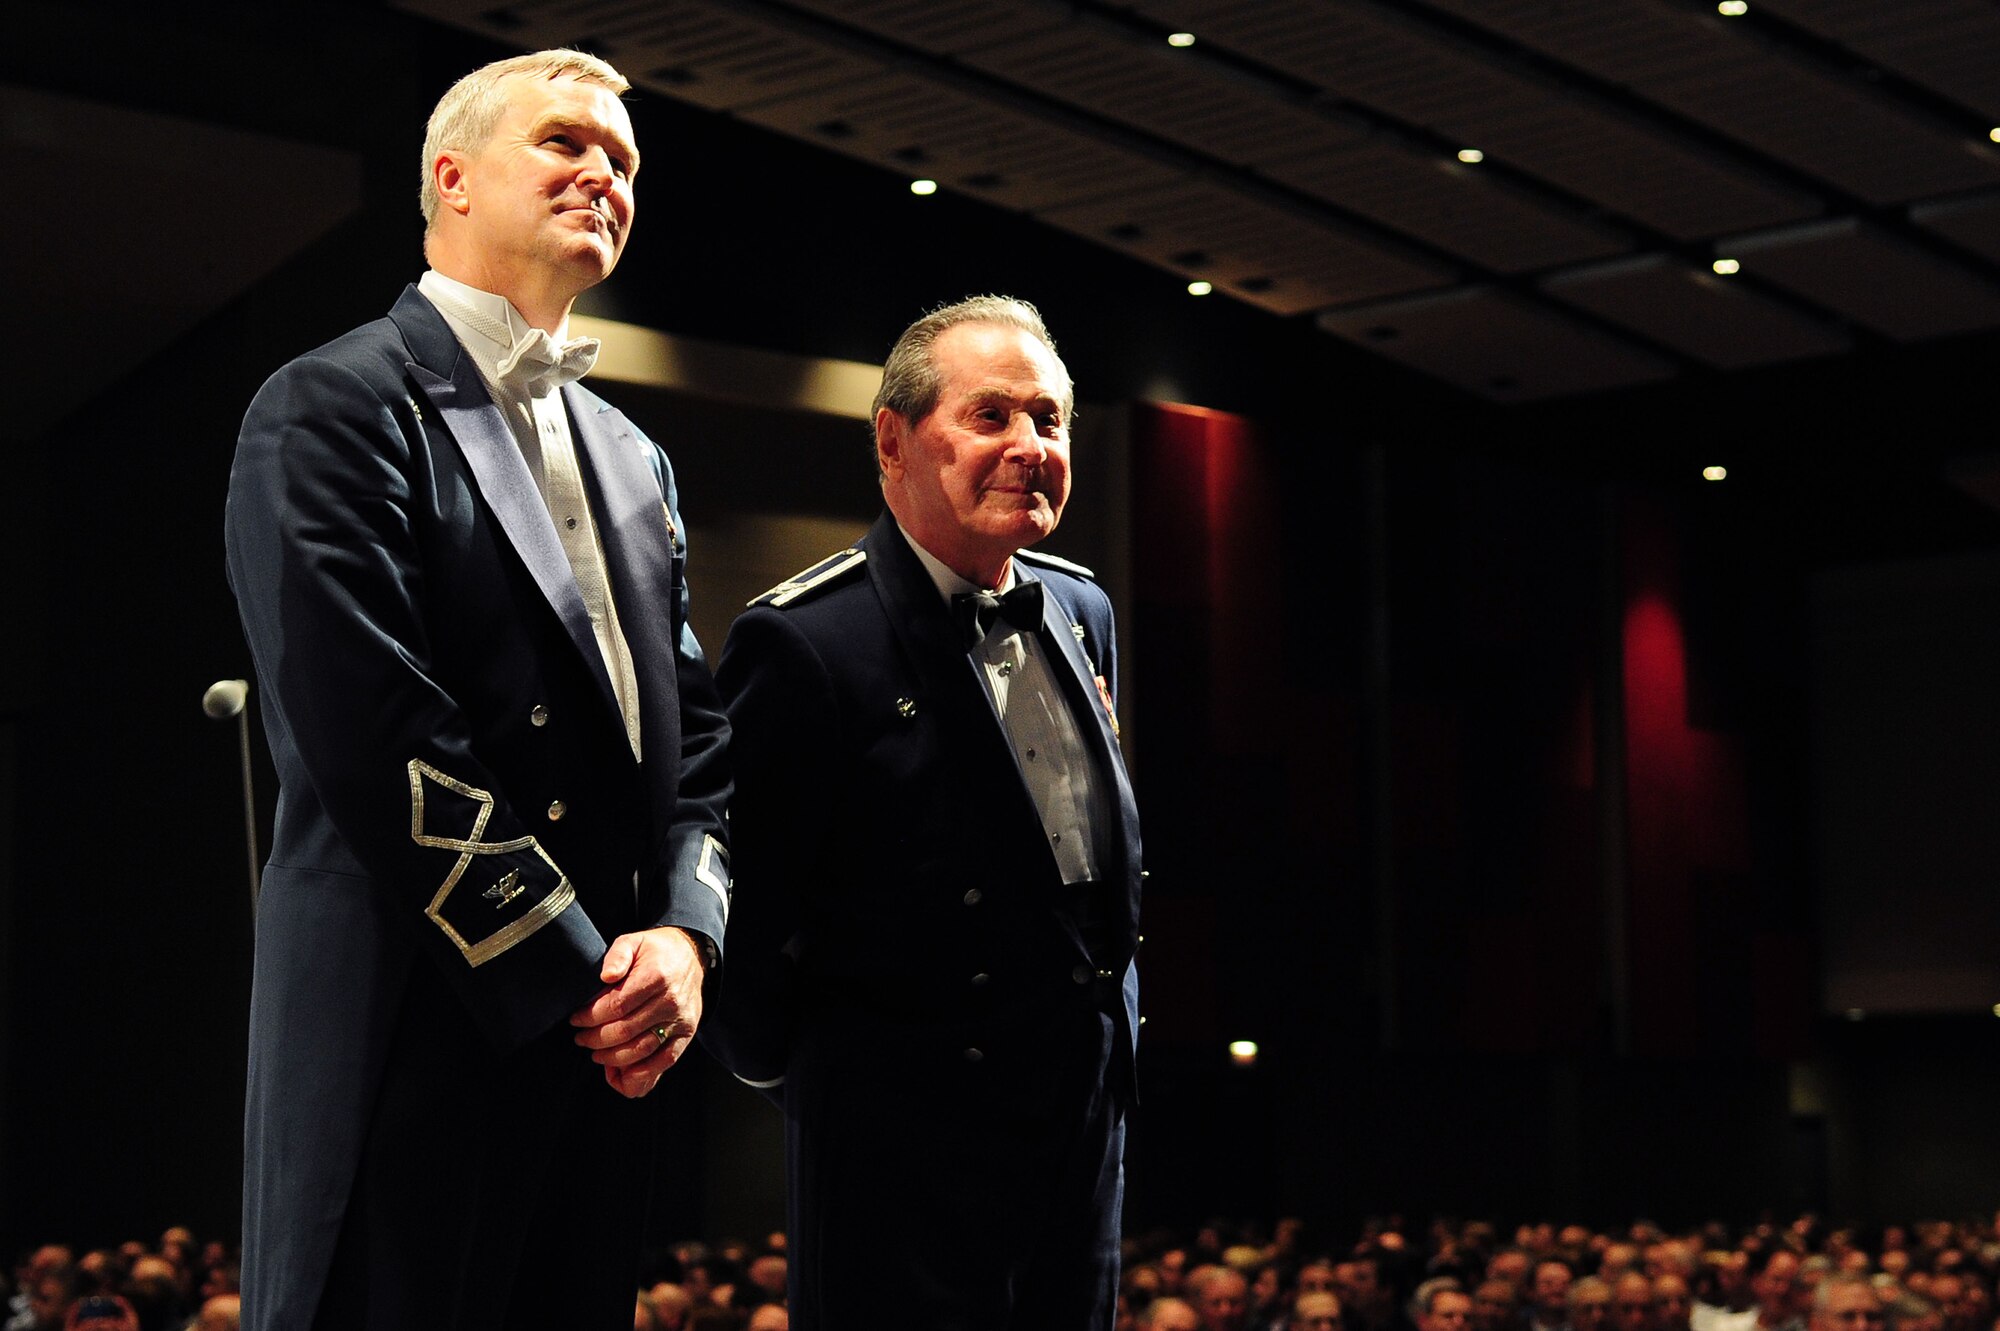 U.S. Air Force Band Commander Col. Larry Lang and Col. Arnald Gabriel (Ret.), USAF Band commander 1964-1985, watch a video tribute dedicated to Gabriel during a performance at the 66th Annual Midwest Clinic, Dec. 19, in Chicago, Ill. "The spirit, musicianship and enthusiasm--it's a tribute to what we're doing in our universities across the nation. The teaching is better than ever; so the bands and the Airmen themselves are playing better than ever." Gabriel was presented the Midwest Clinic Medal of Honor during the final performance. (U.S. Air Force photo by Senior Airman Steele C. G. Britton)